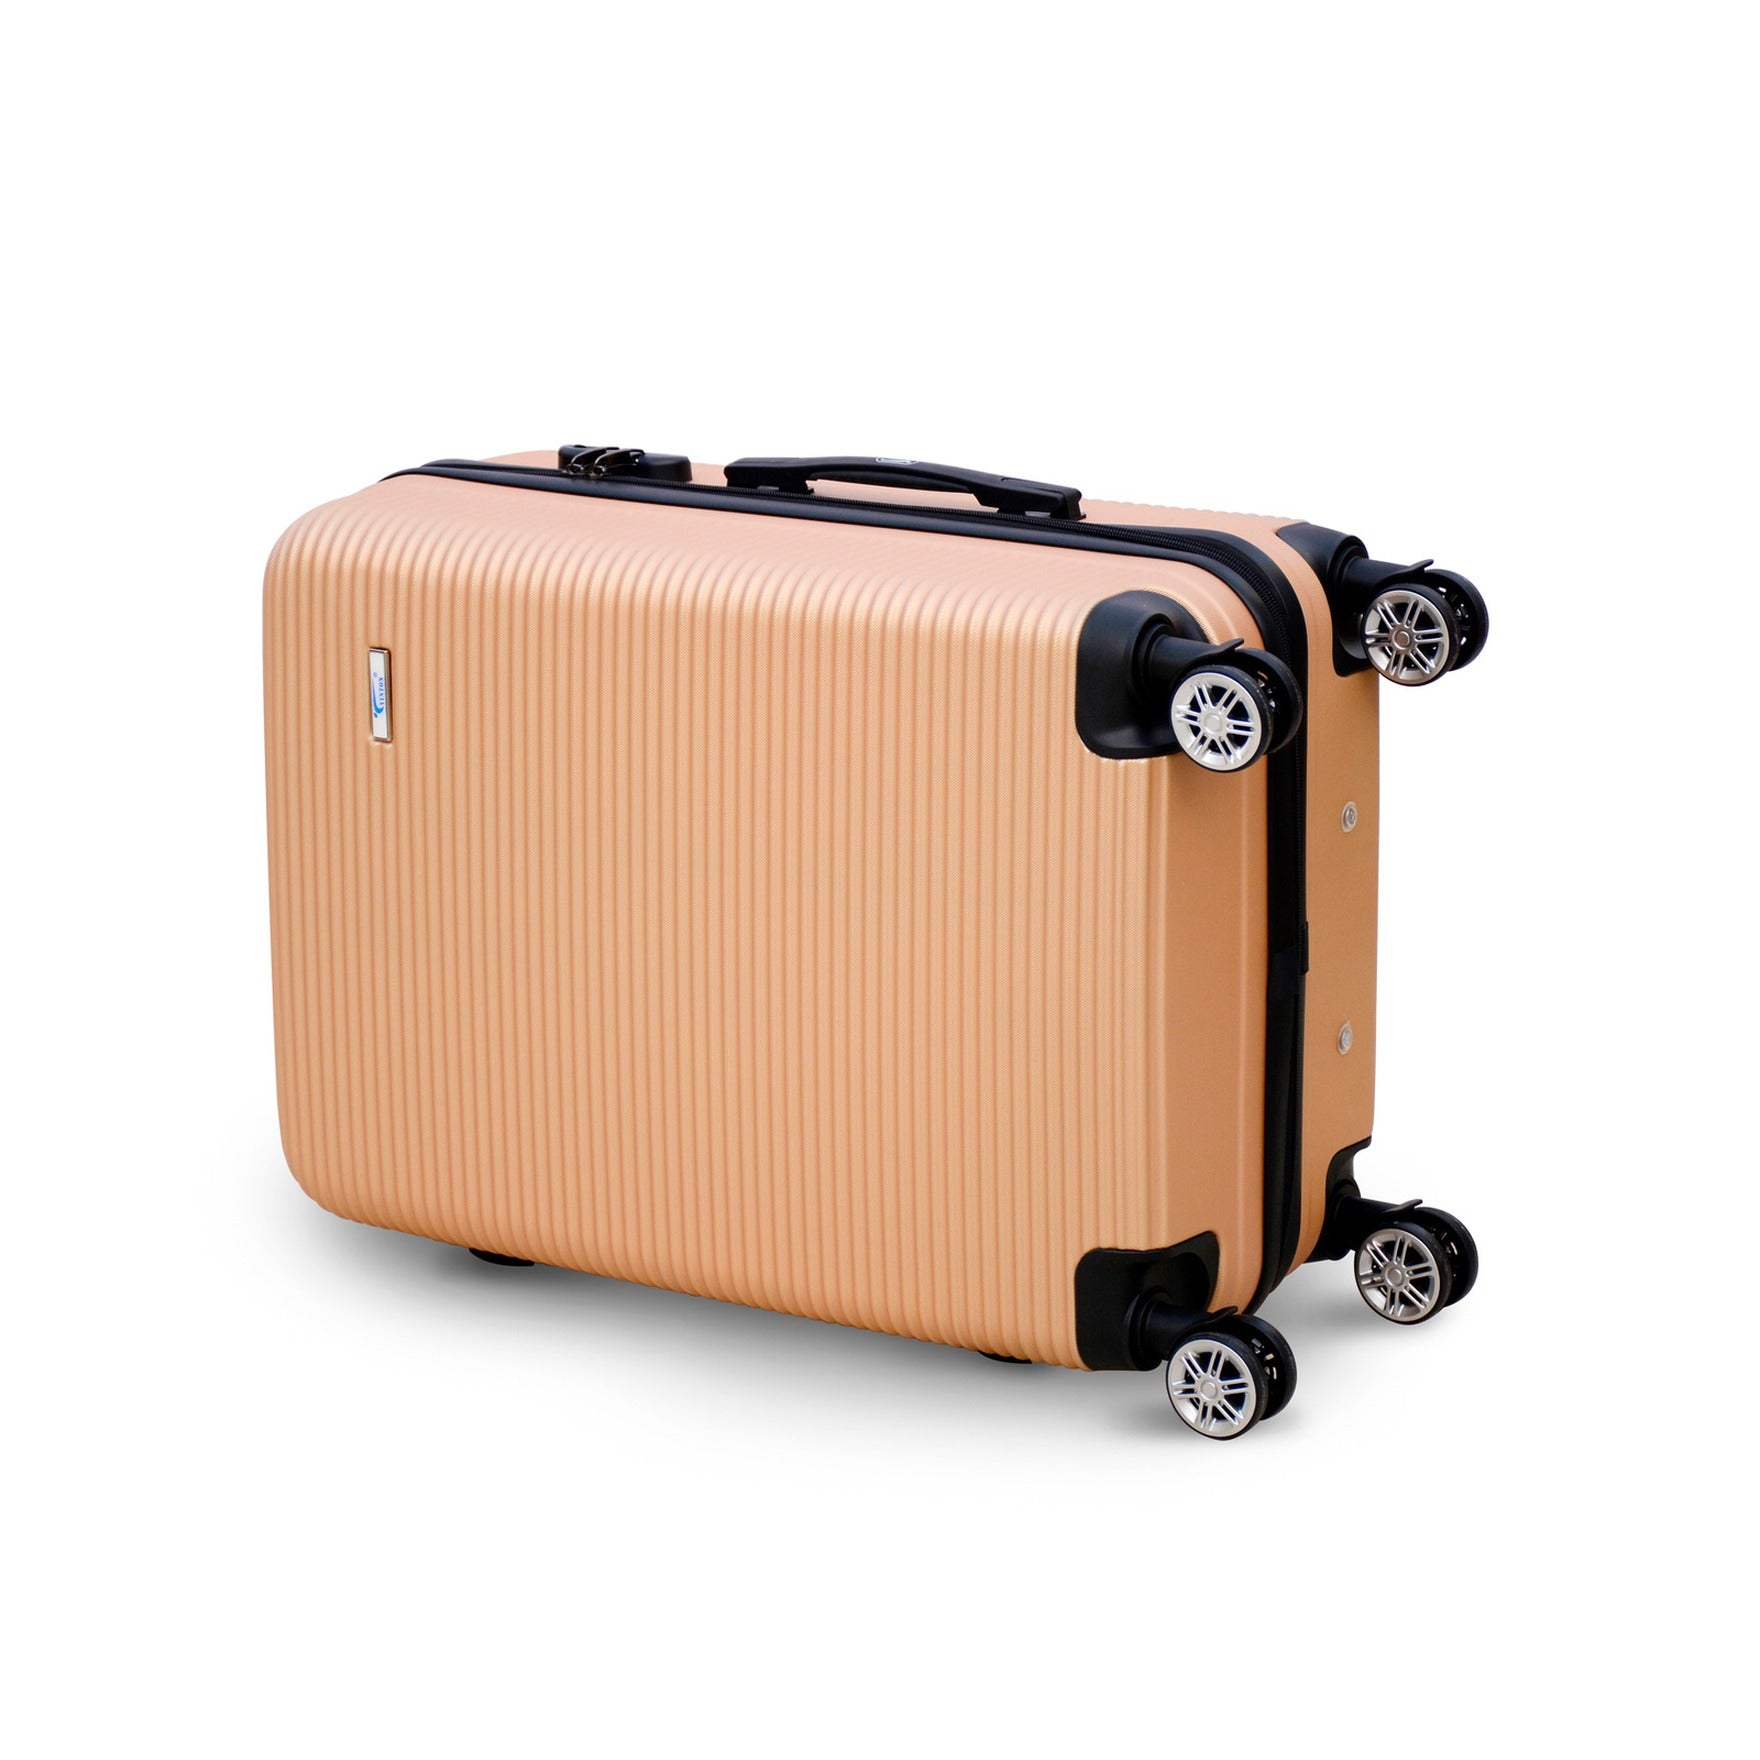 24" Gold Colour JIAN ABS Line Luggage Lightweight Hard Case Trolley Bag With Spinner Wheel